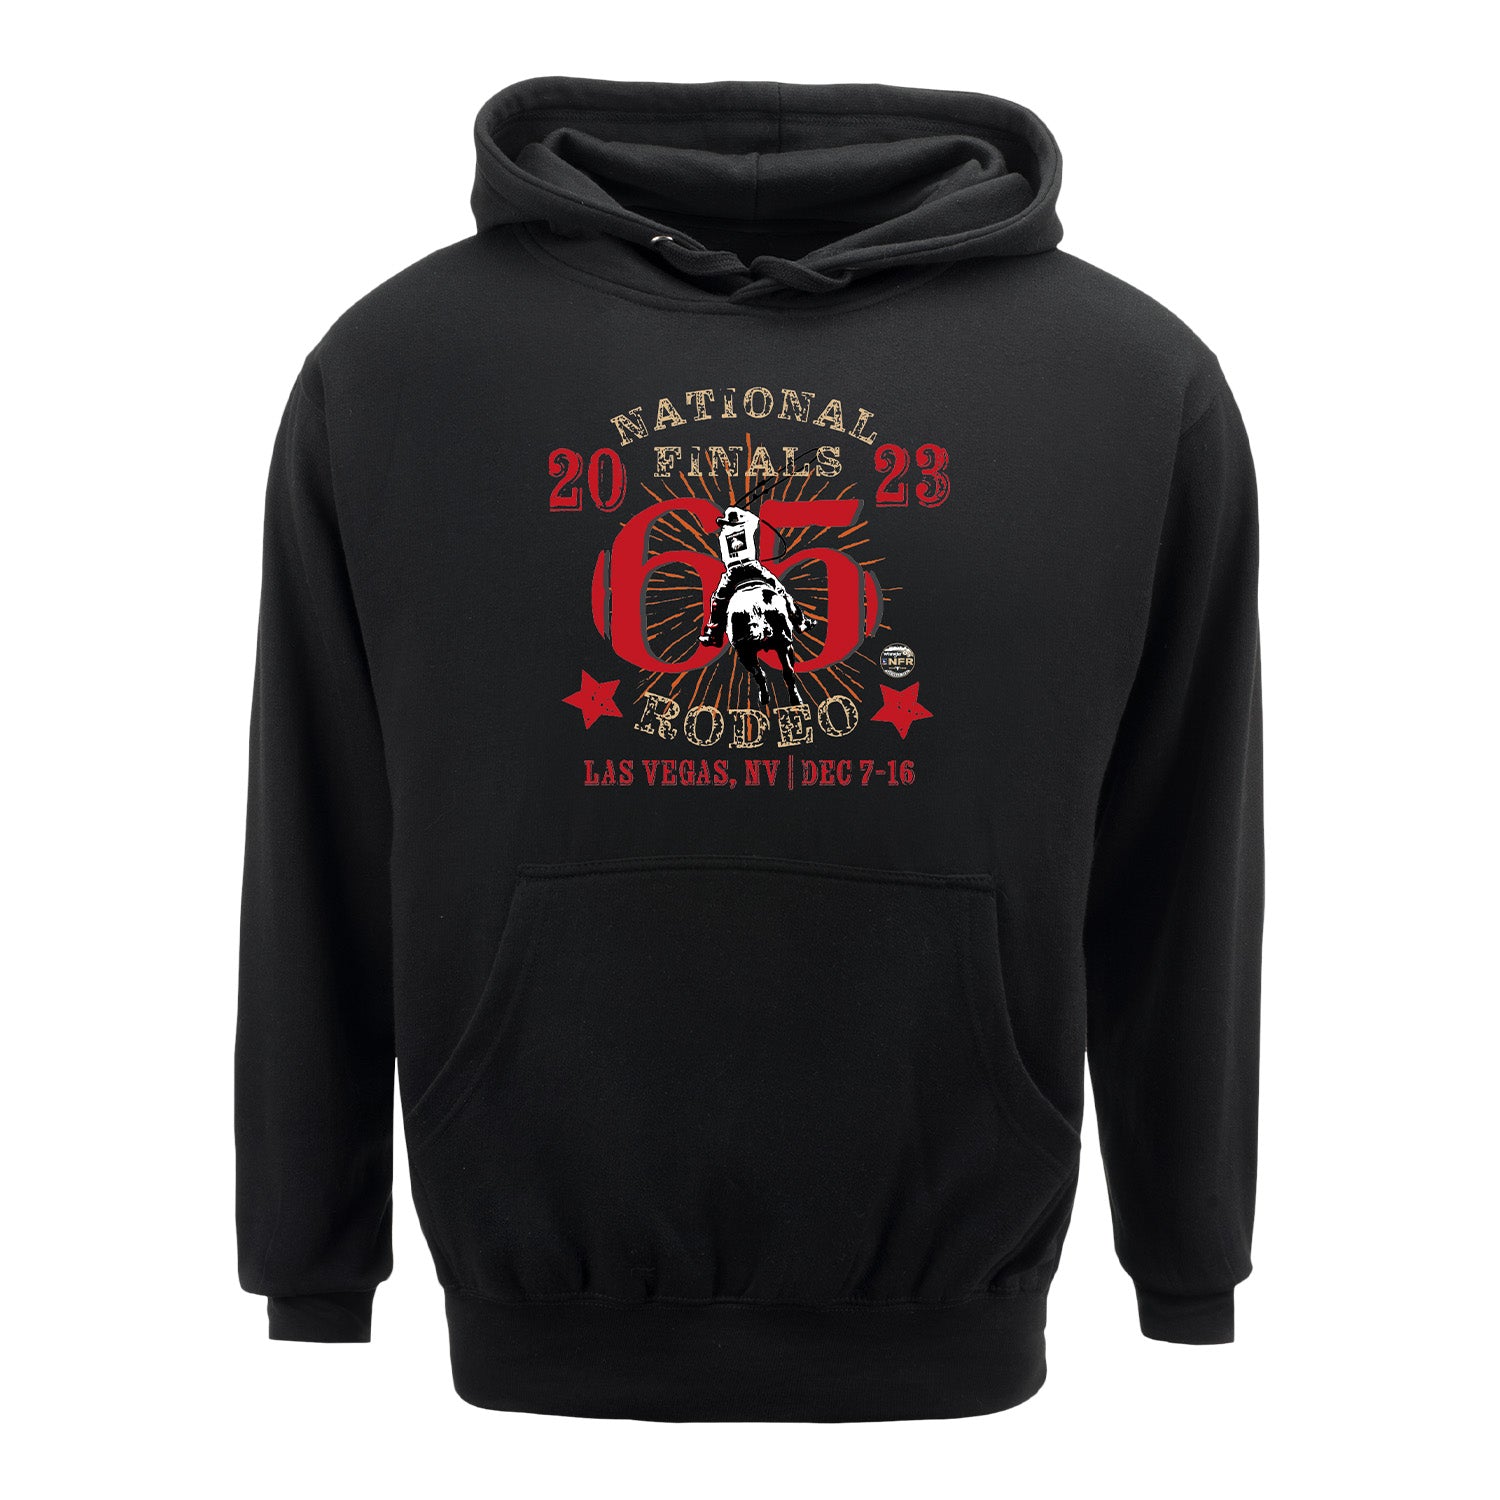 NFR 65th Anniversary Sweatshirt - Front View